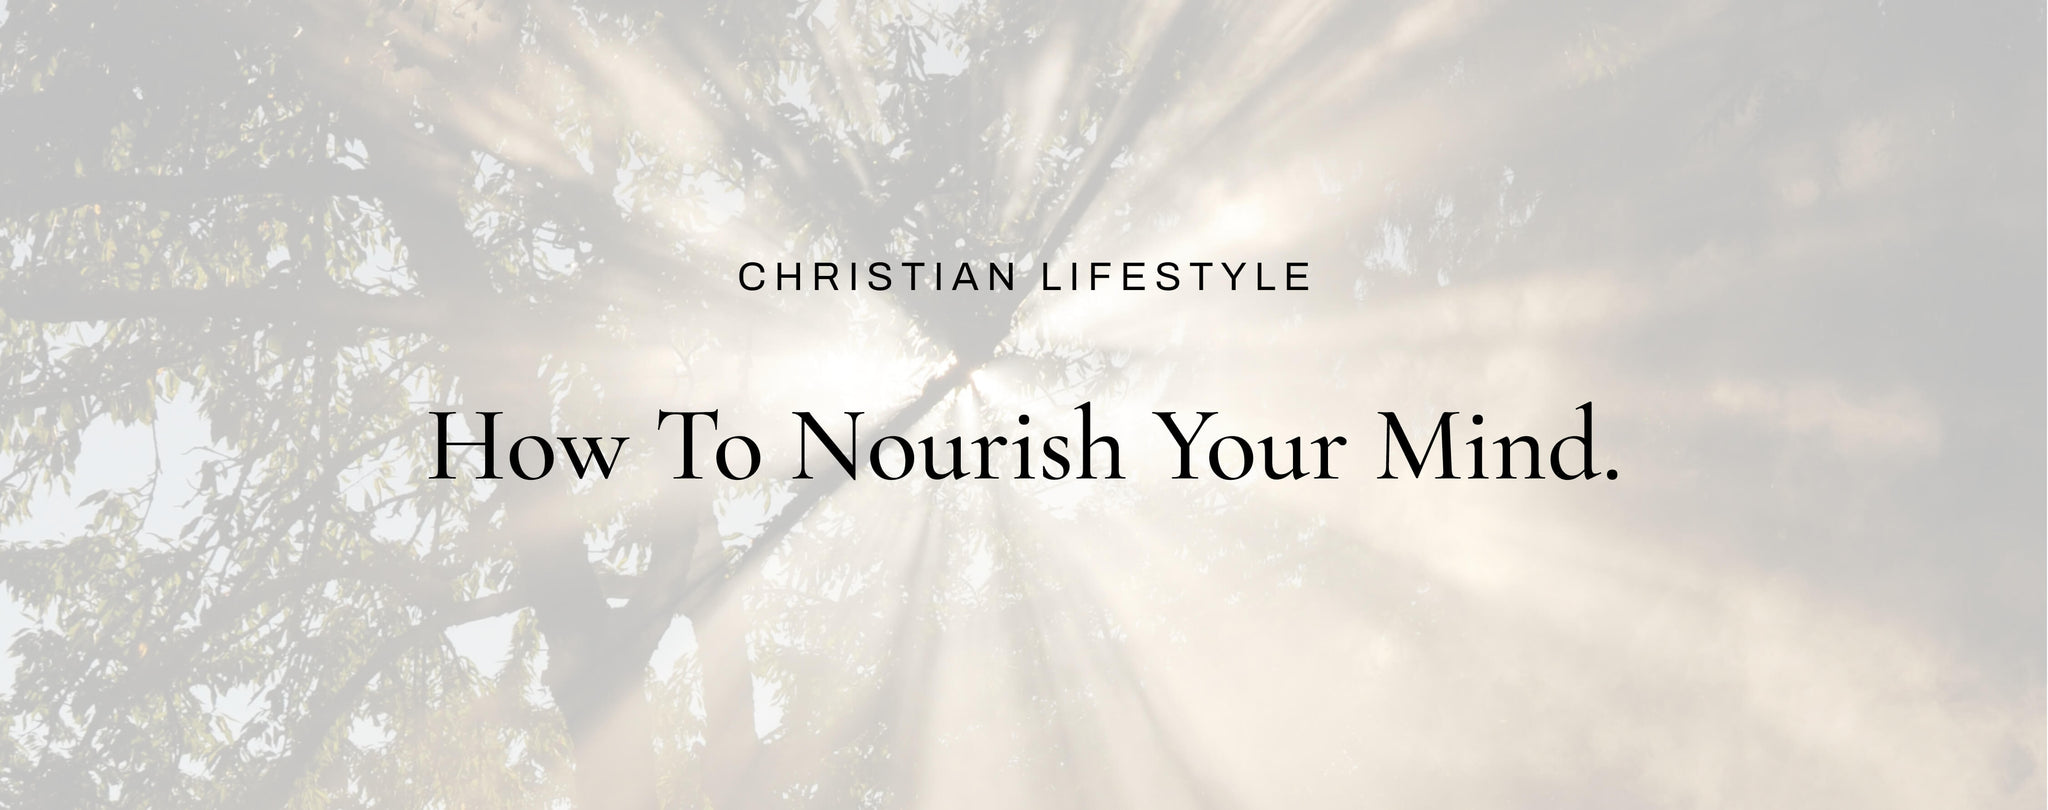 nourish your mind for a better relationship with god